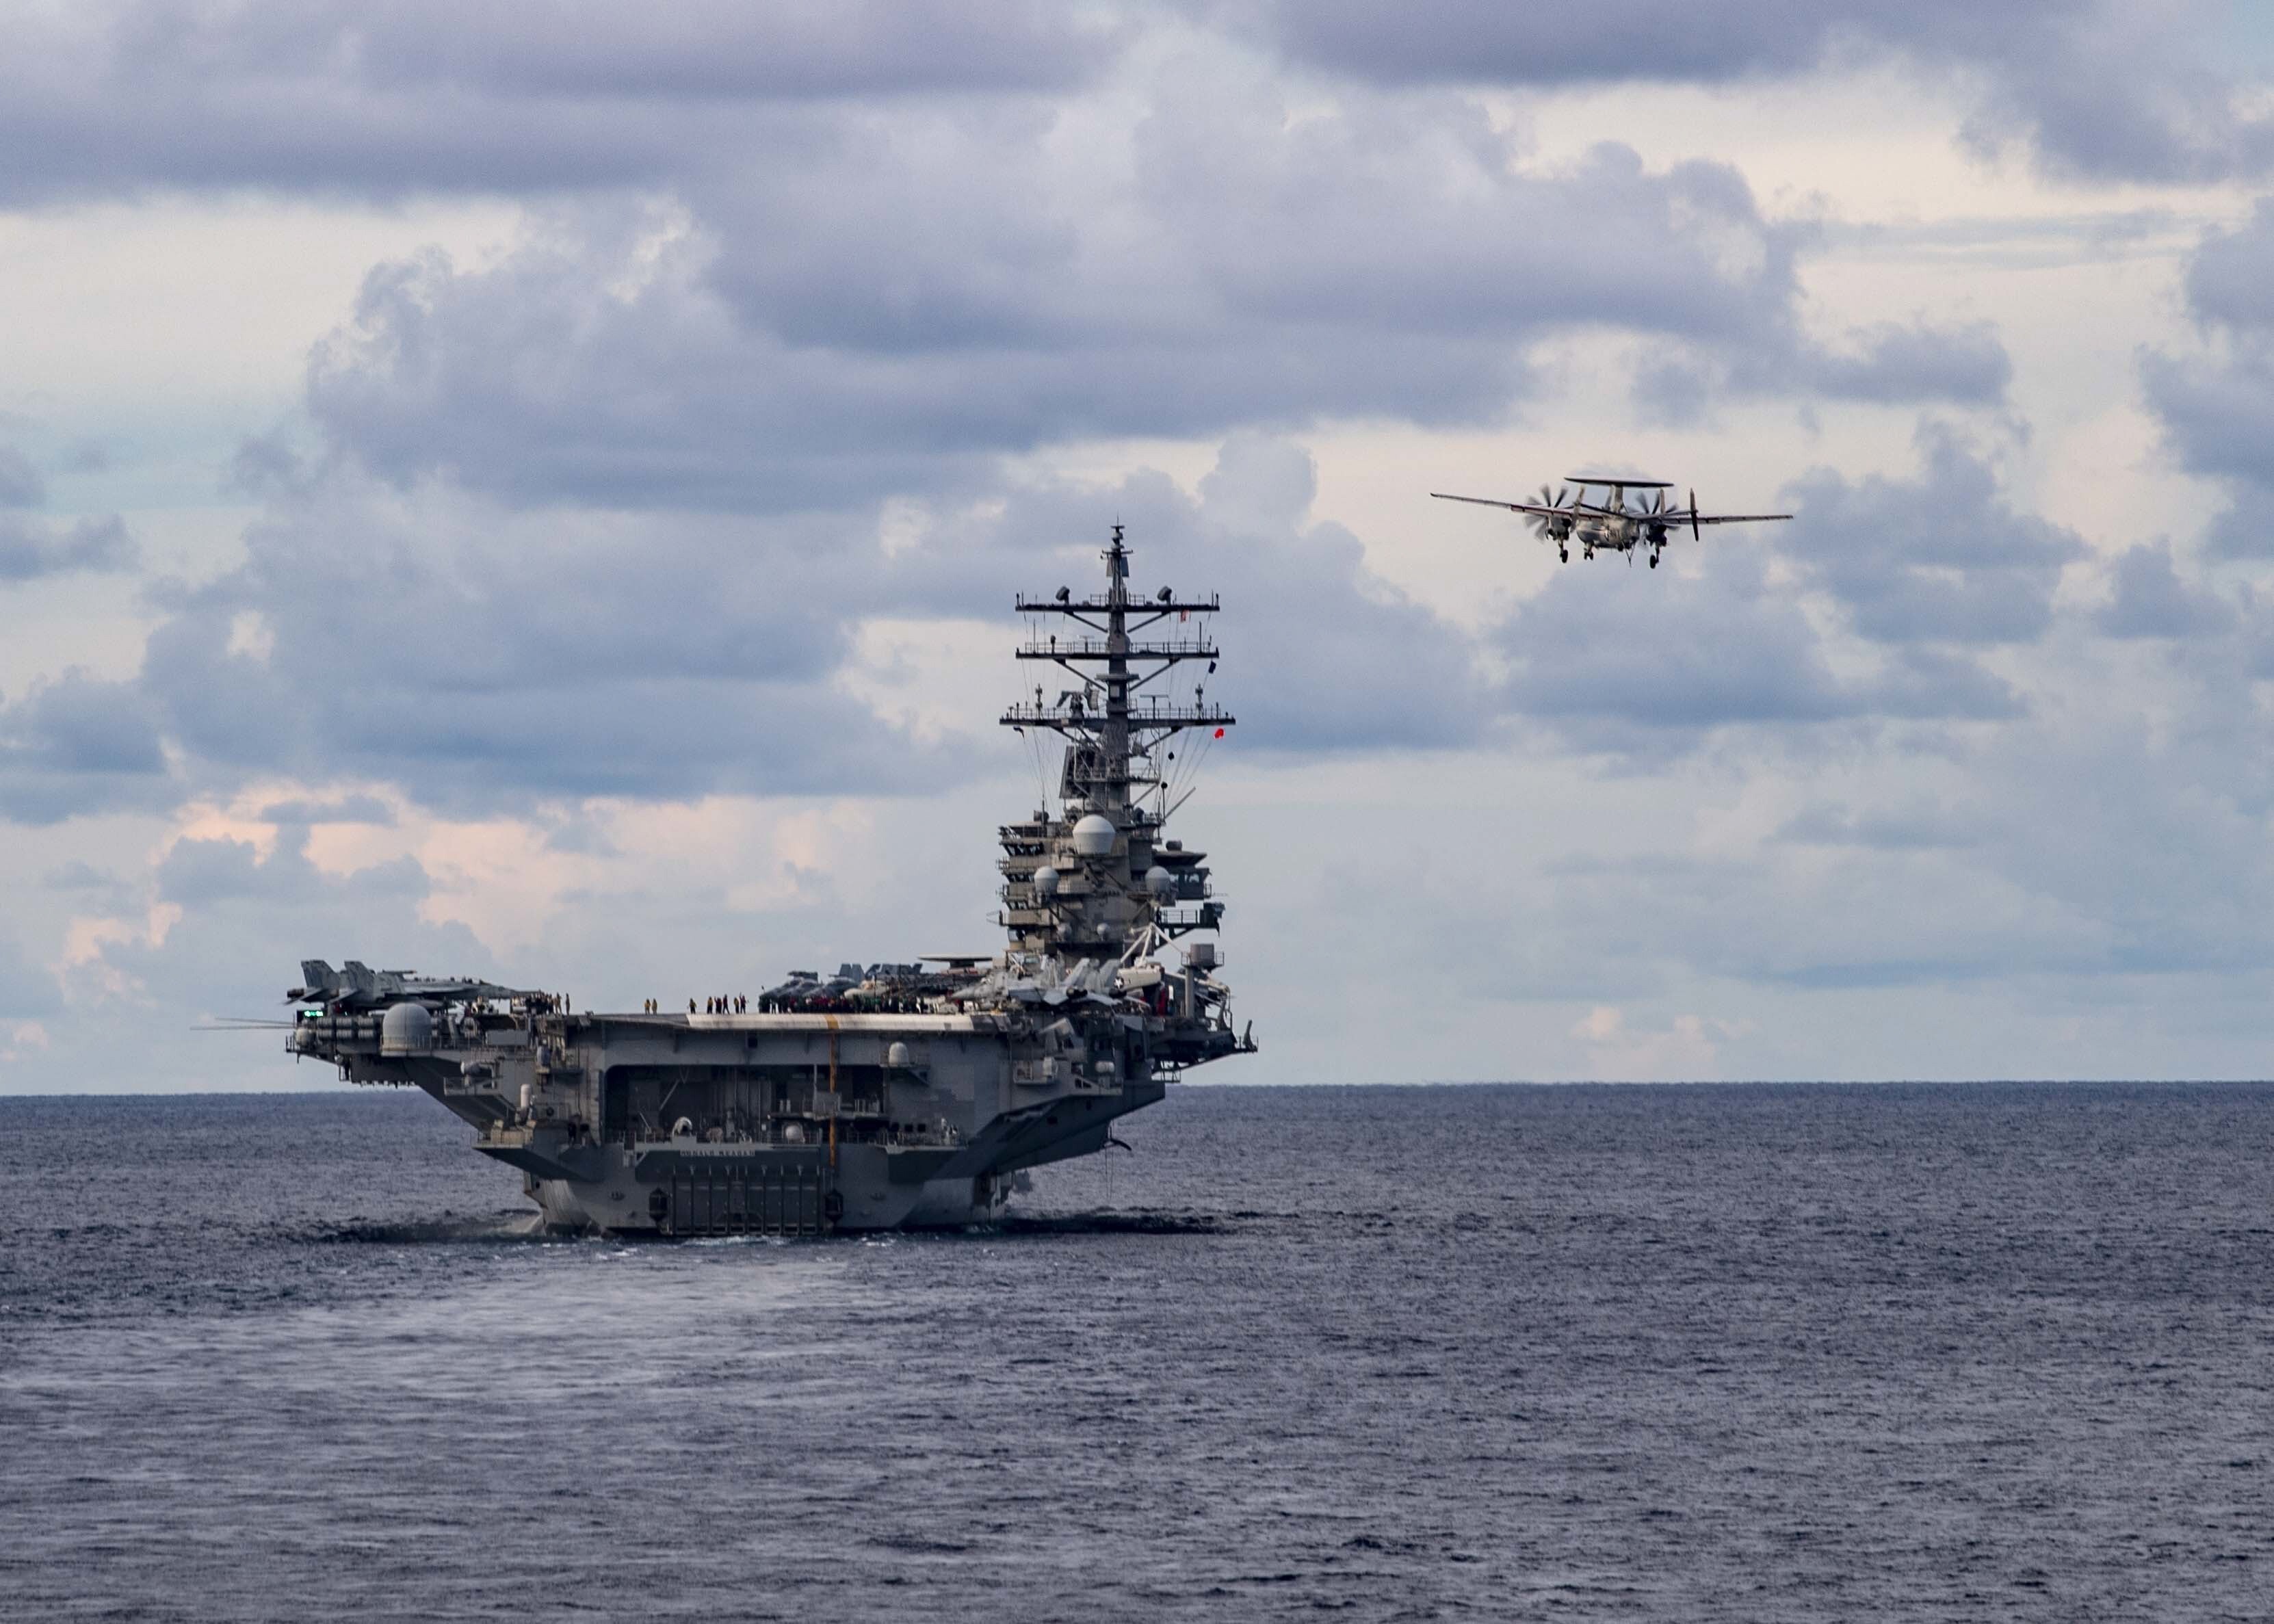 A US surveillance plane flies past the USS Ronald Reagan aircraft carrier during a drill in the South China Sea earlier this month. Photo: EPA